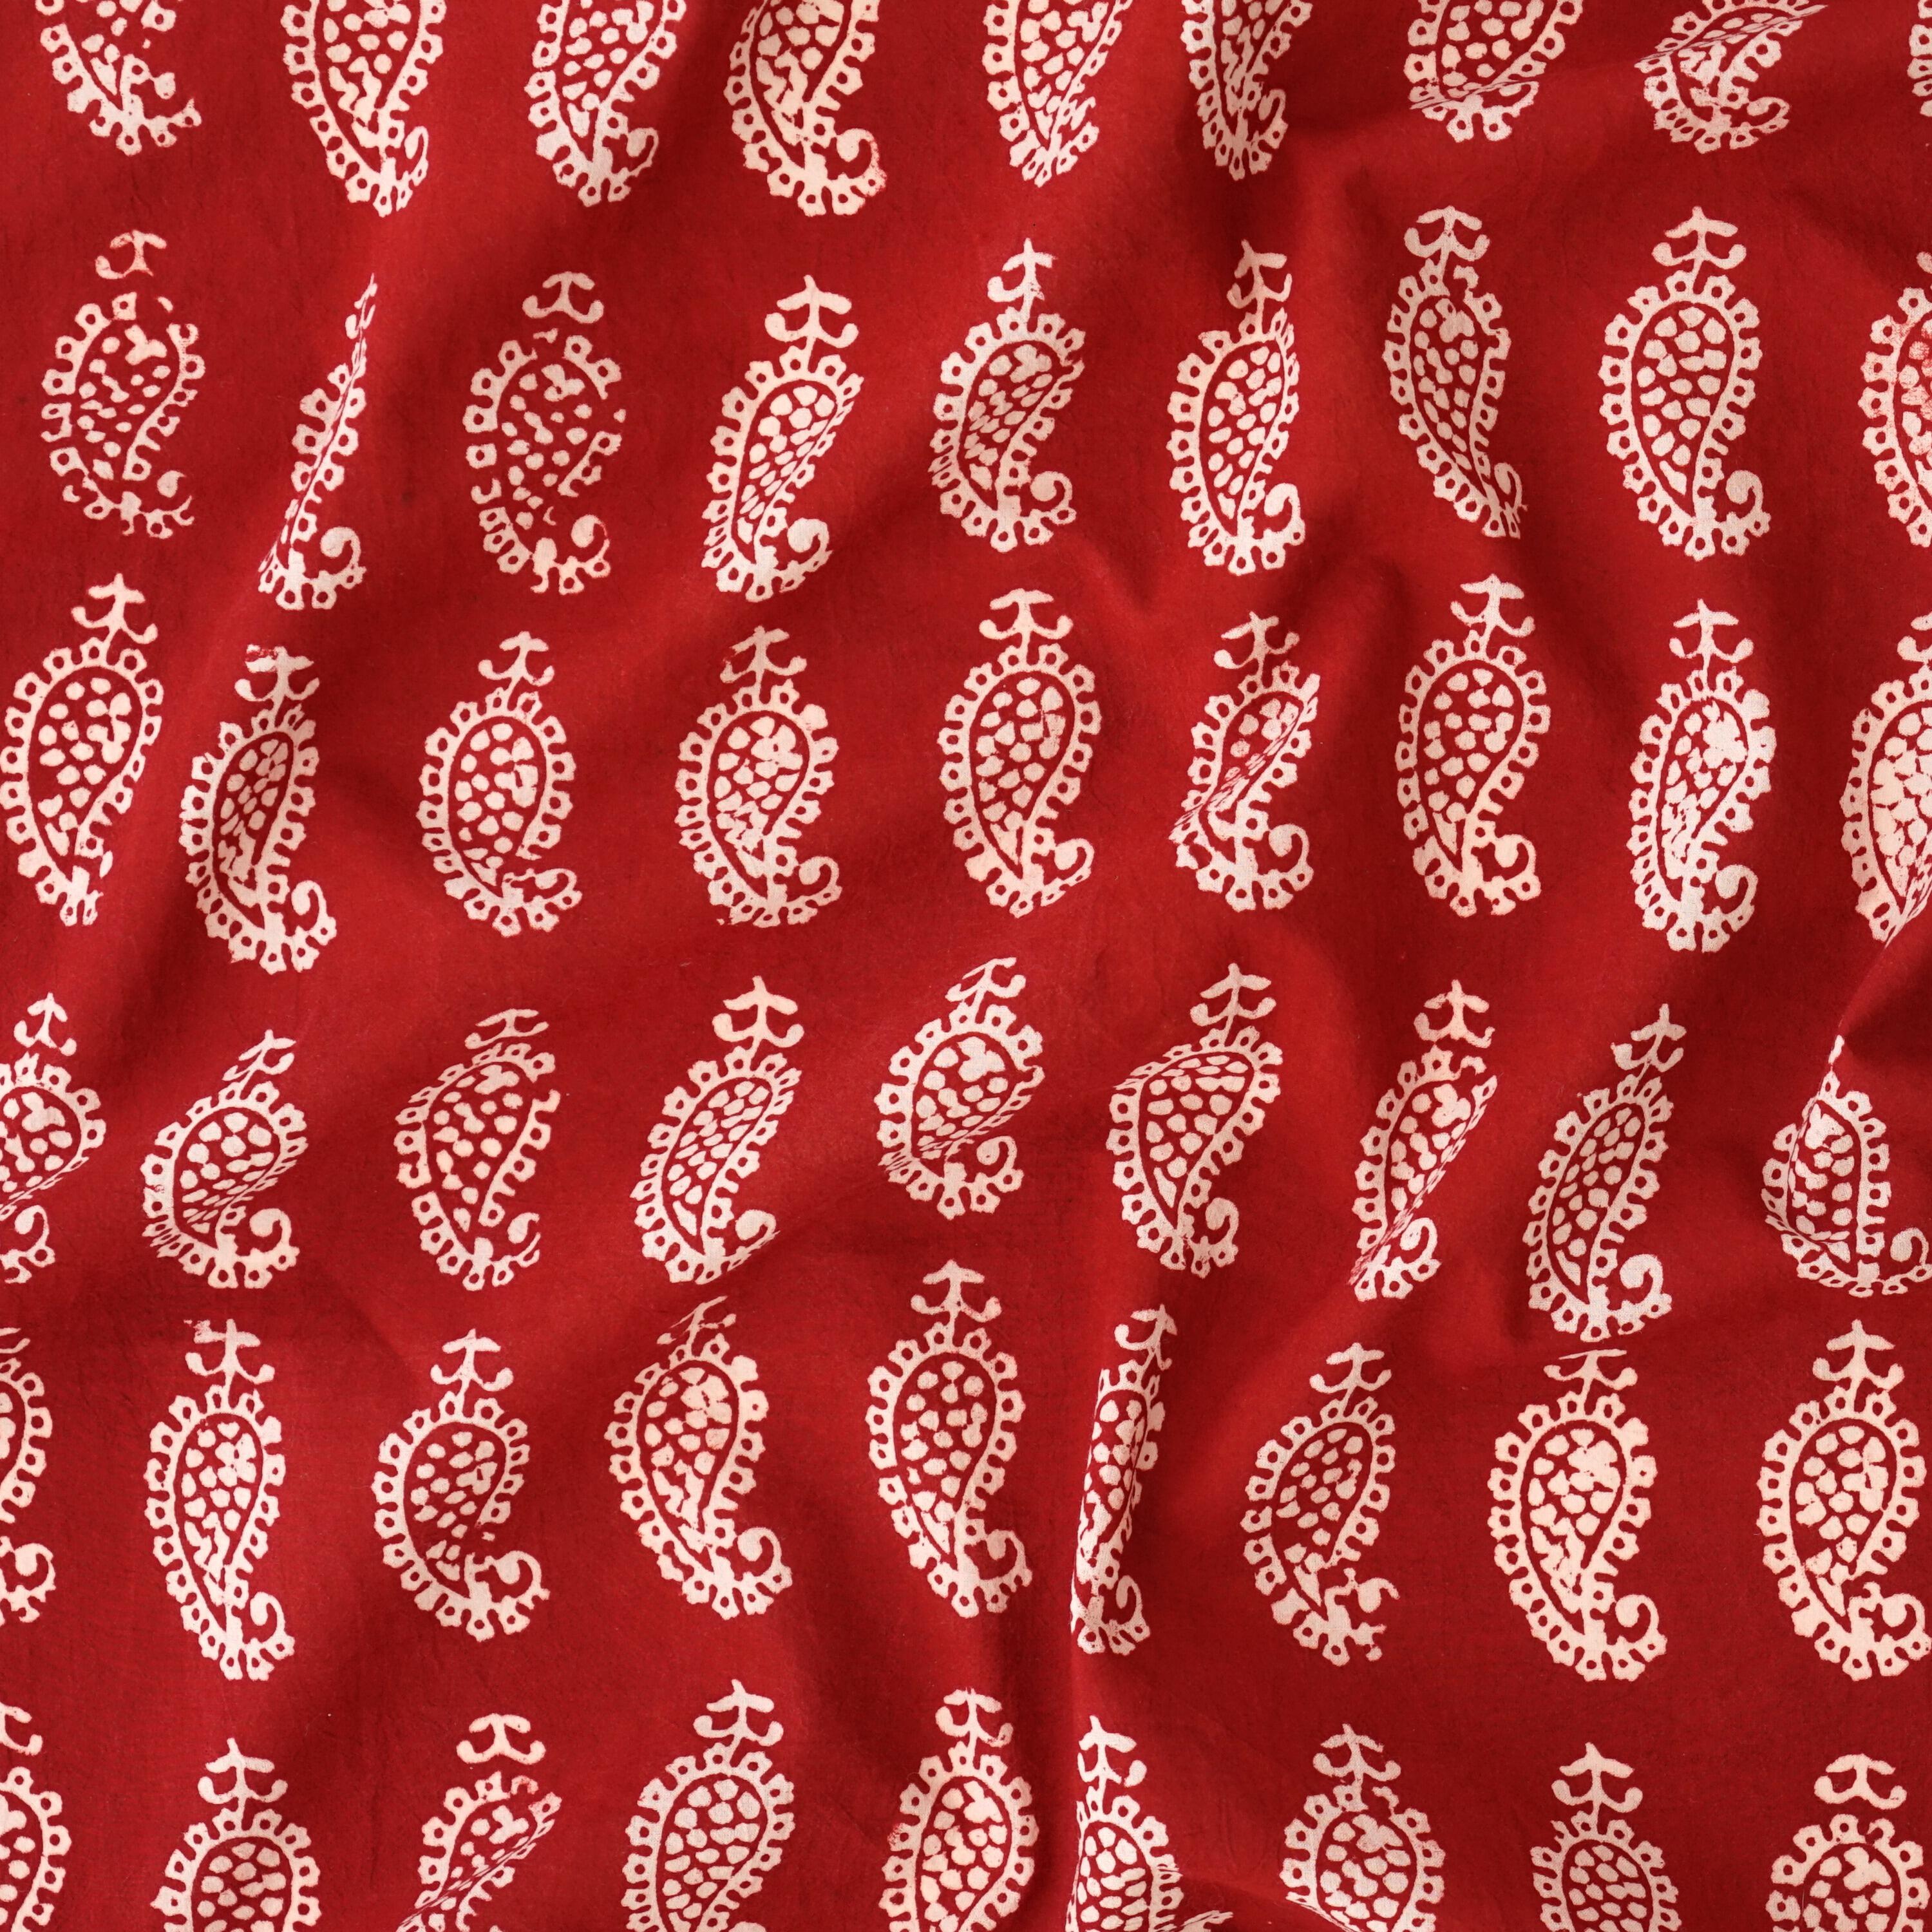 100% Block-Printed Cotton Fabric From India - Raindrops Design - Iron Rust Black & Alizarin Red Dyes - Contrast